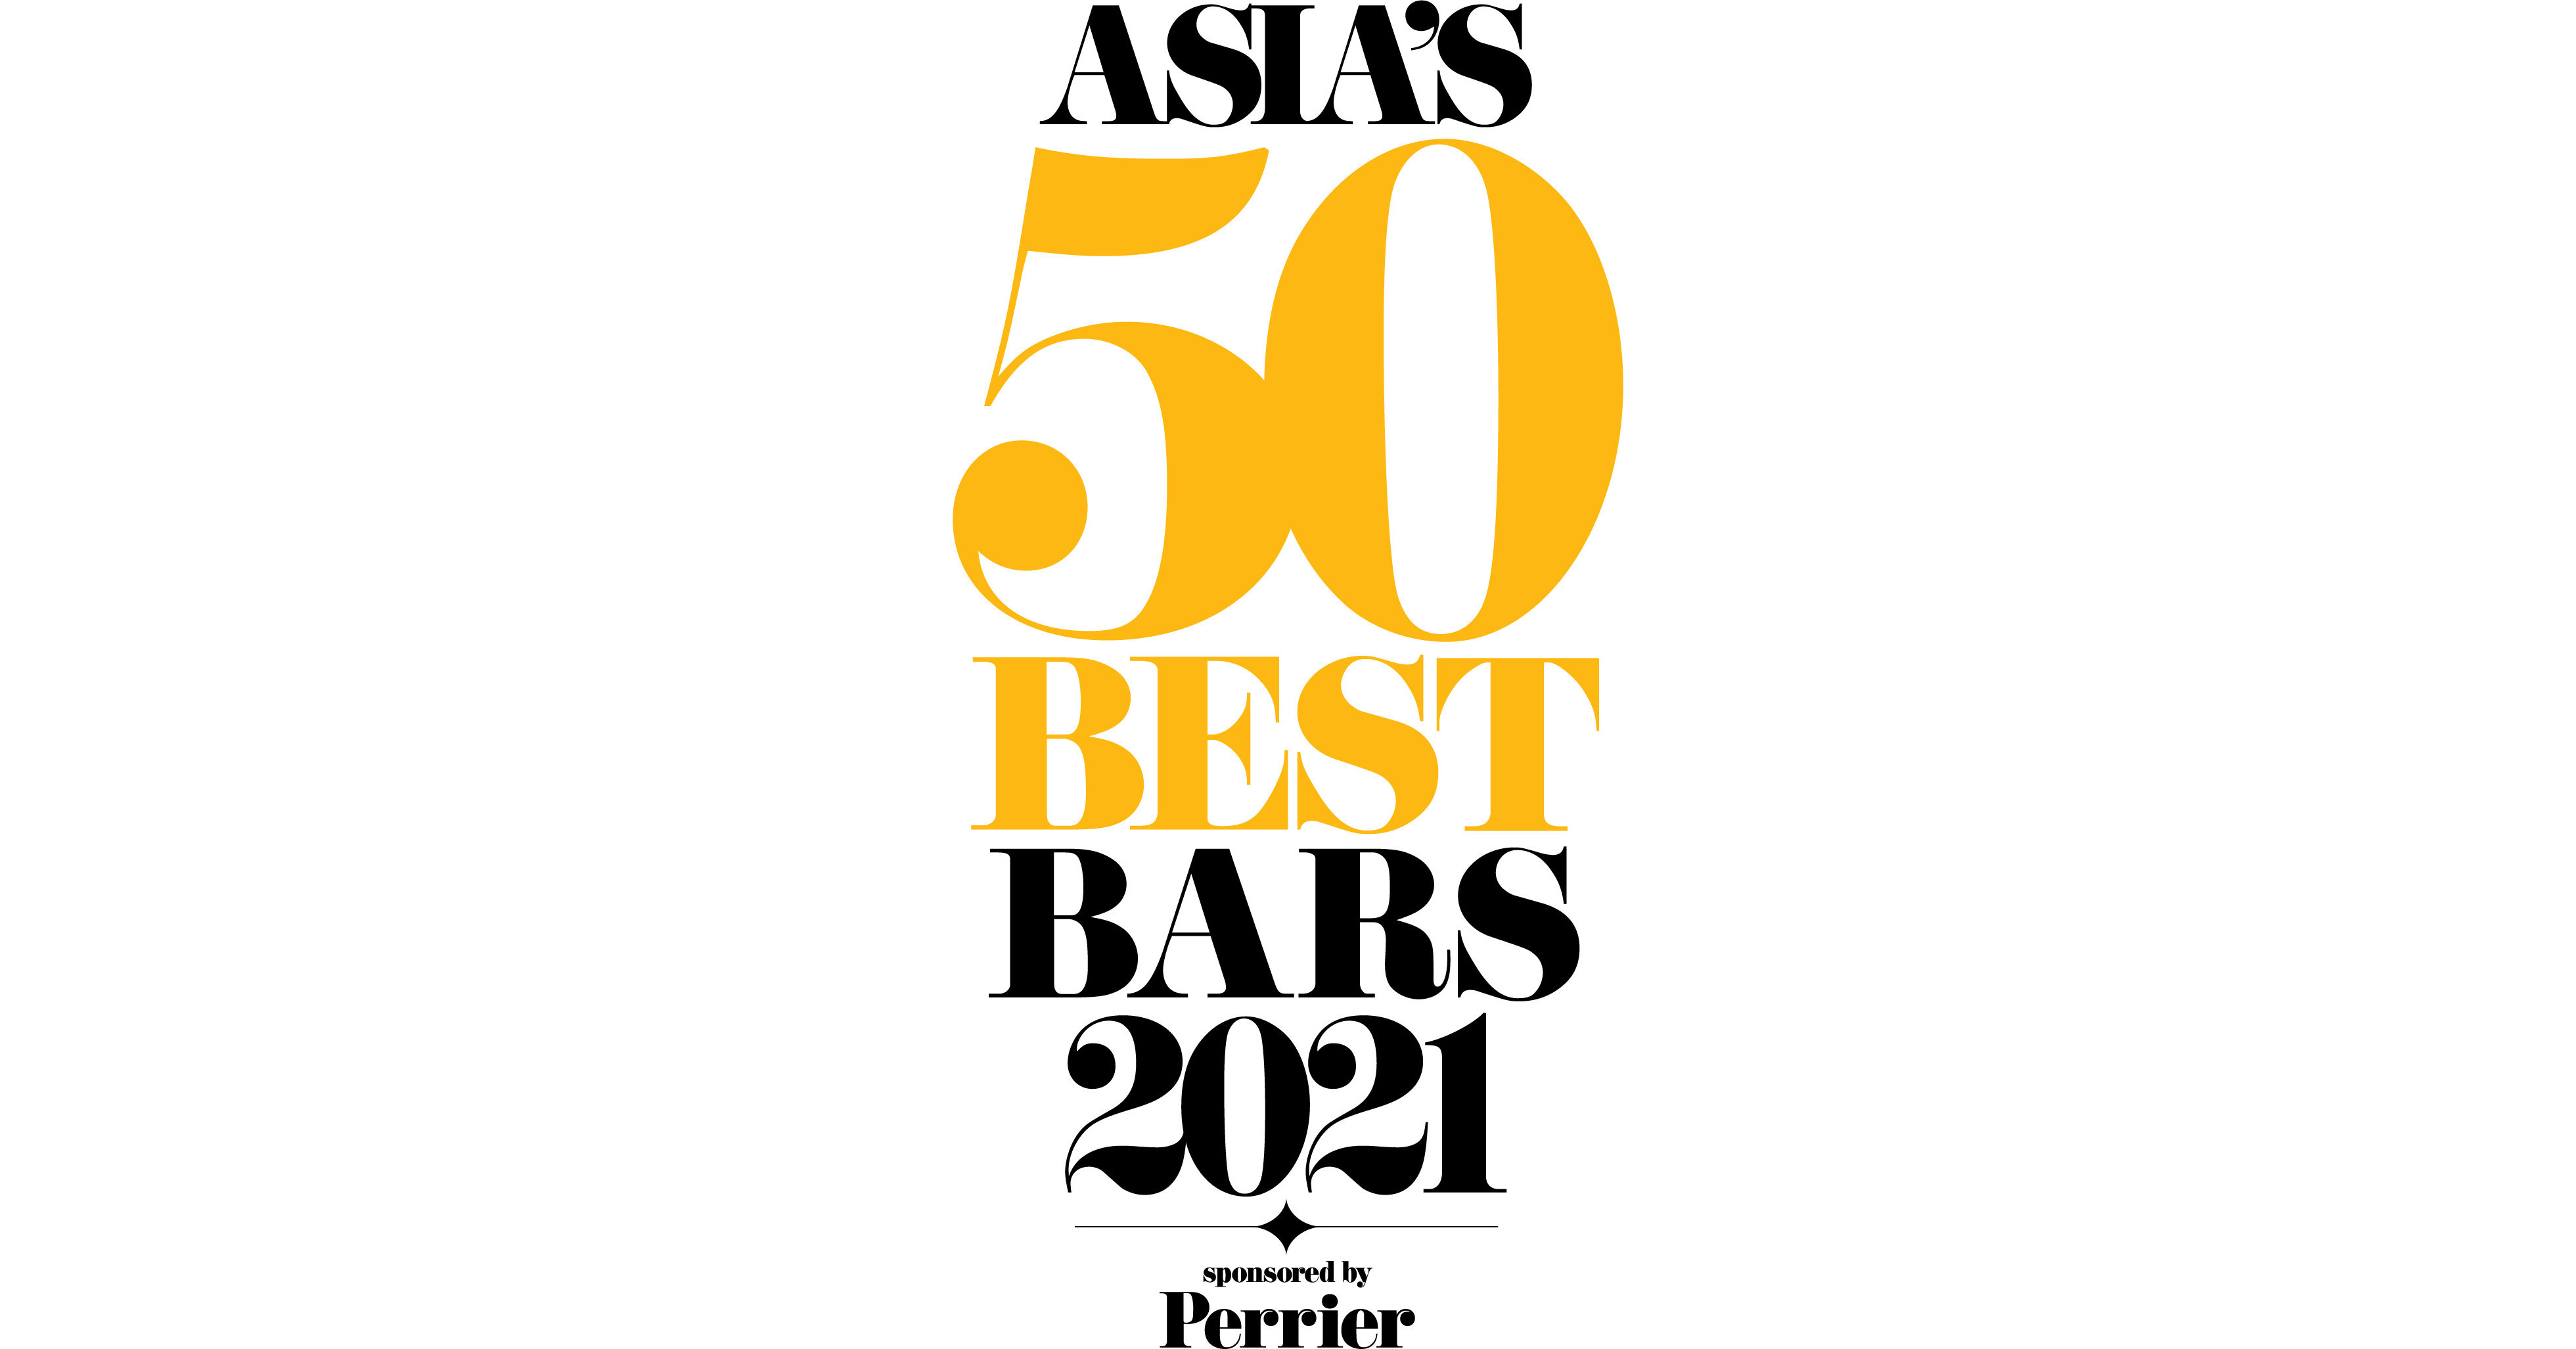 17 Greater China Bars Make Asia's 50 Best Bars List